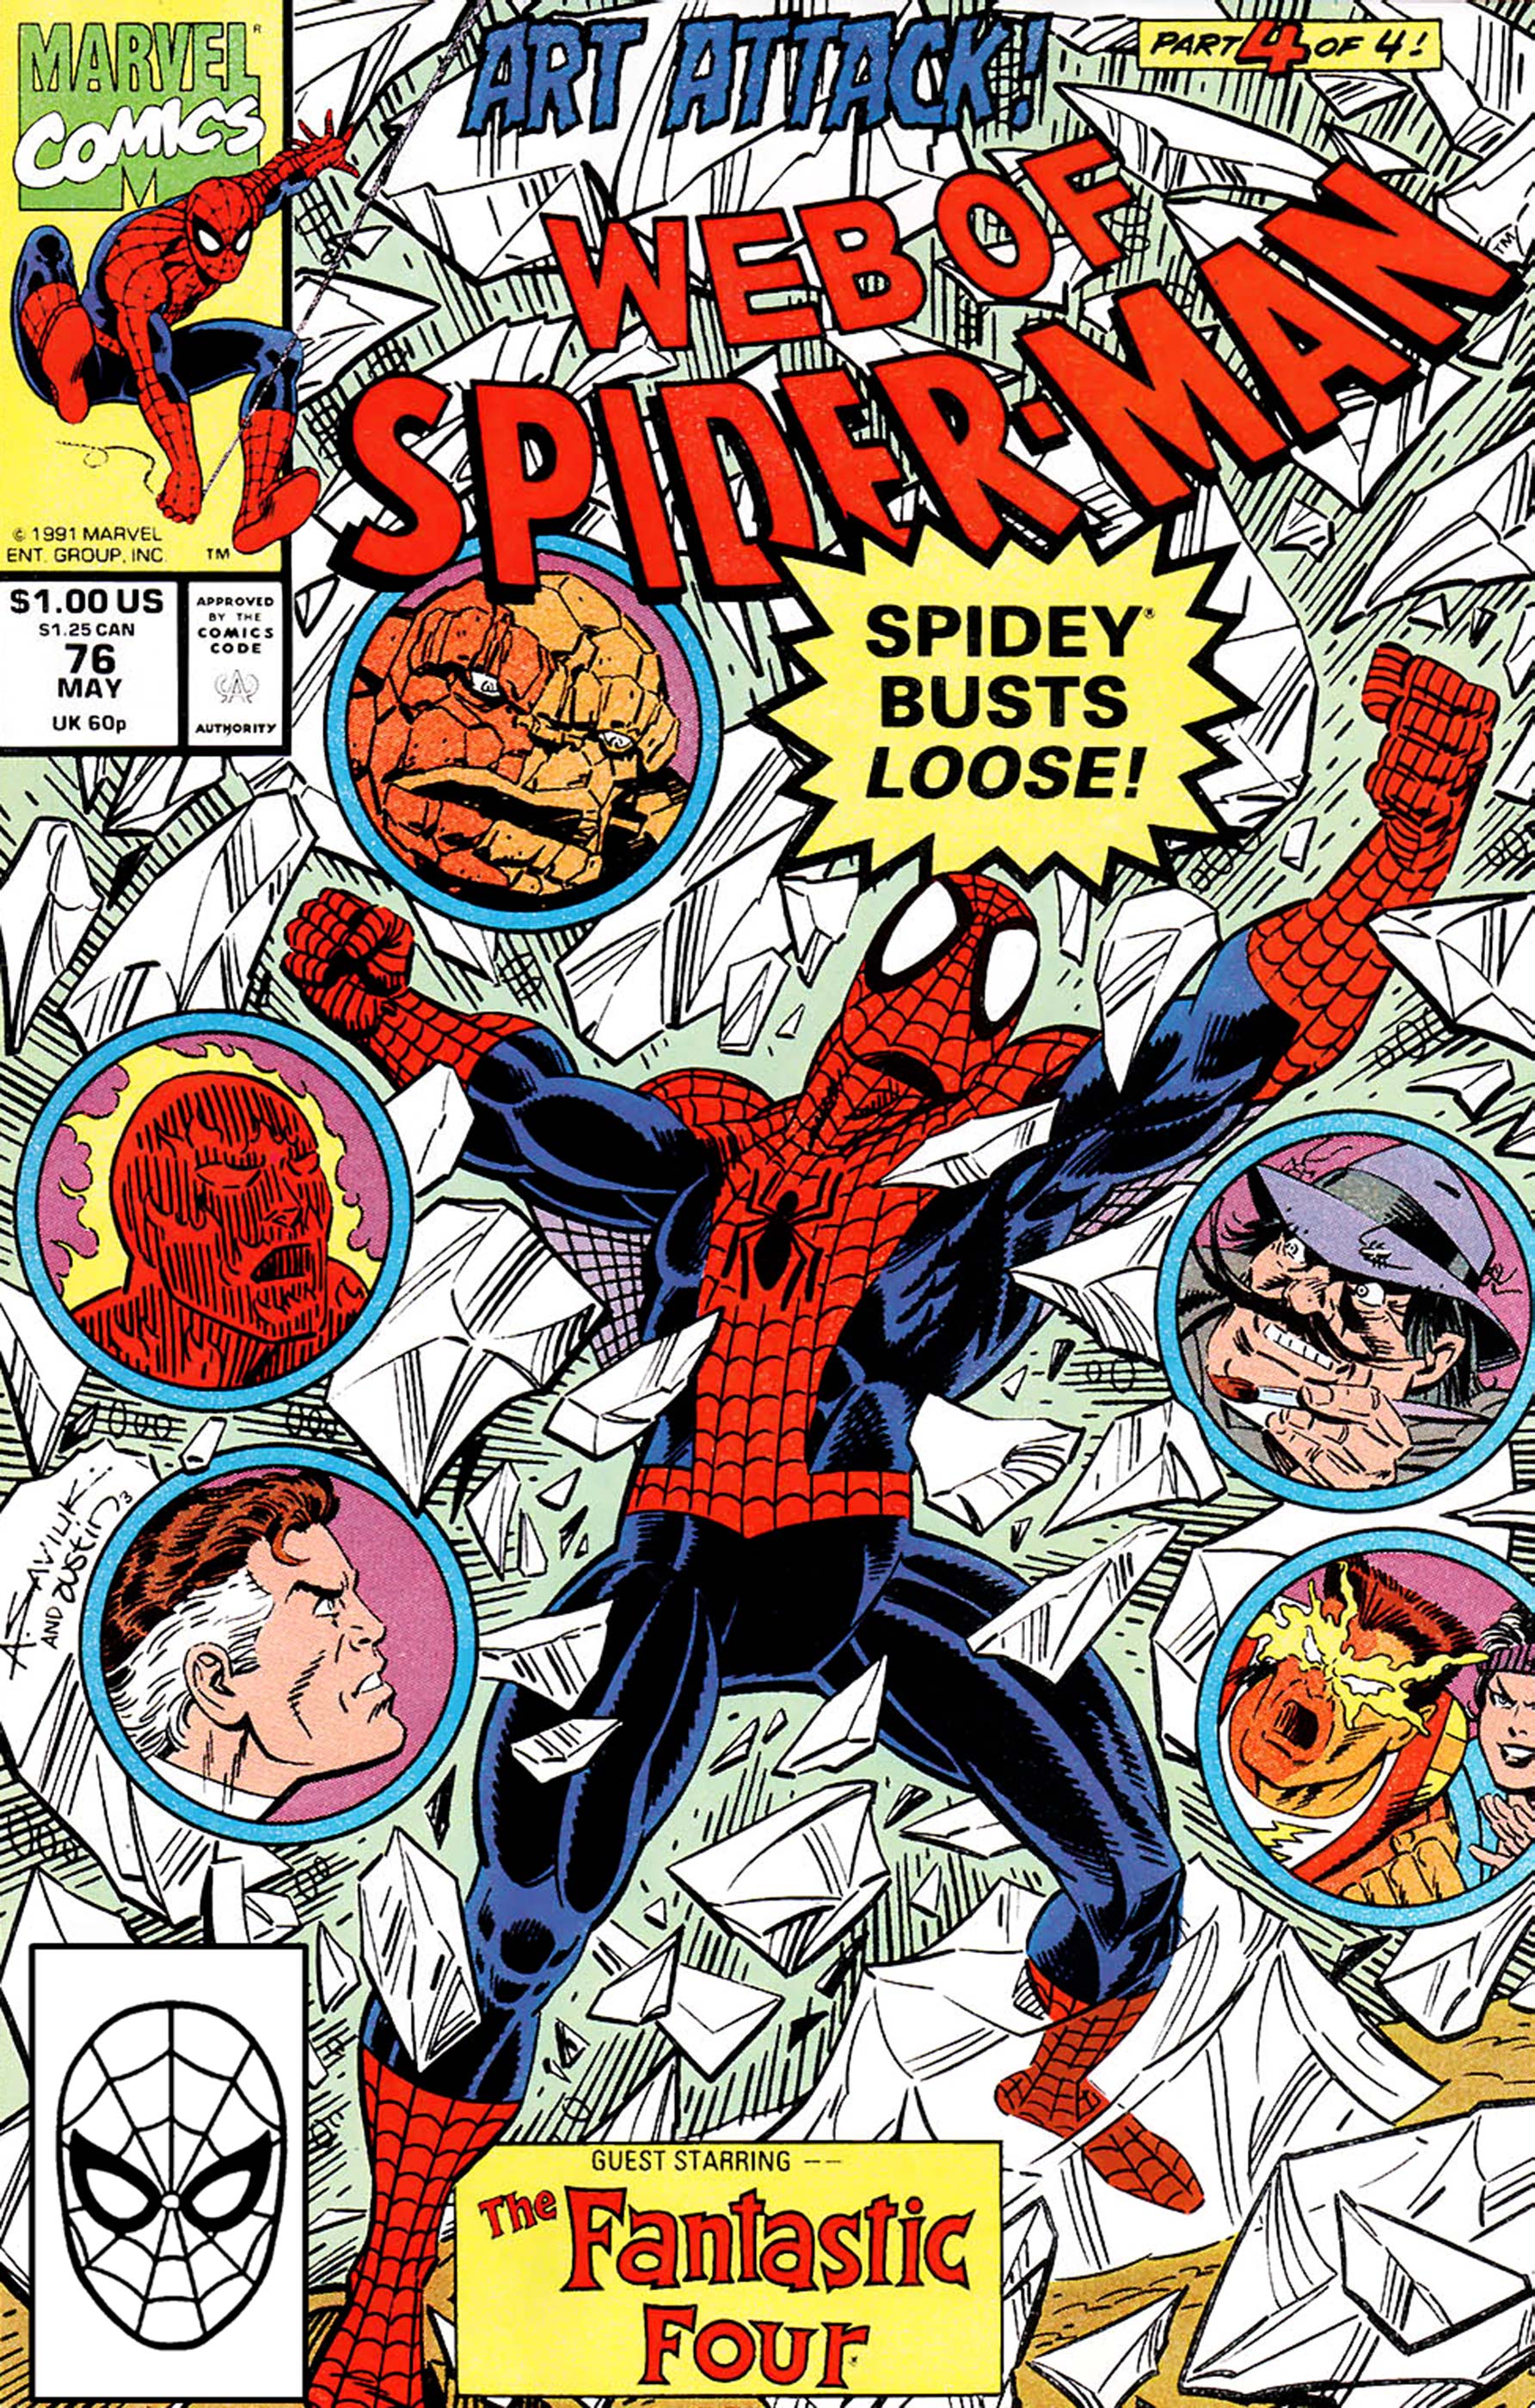 Web of Spider-Man (1985) #76 | Comic Issues | Marvel